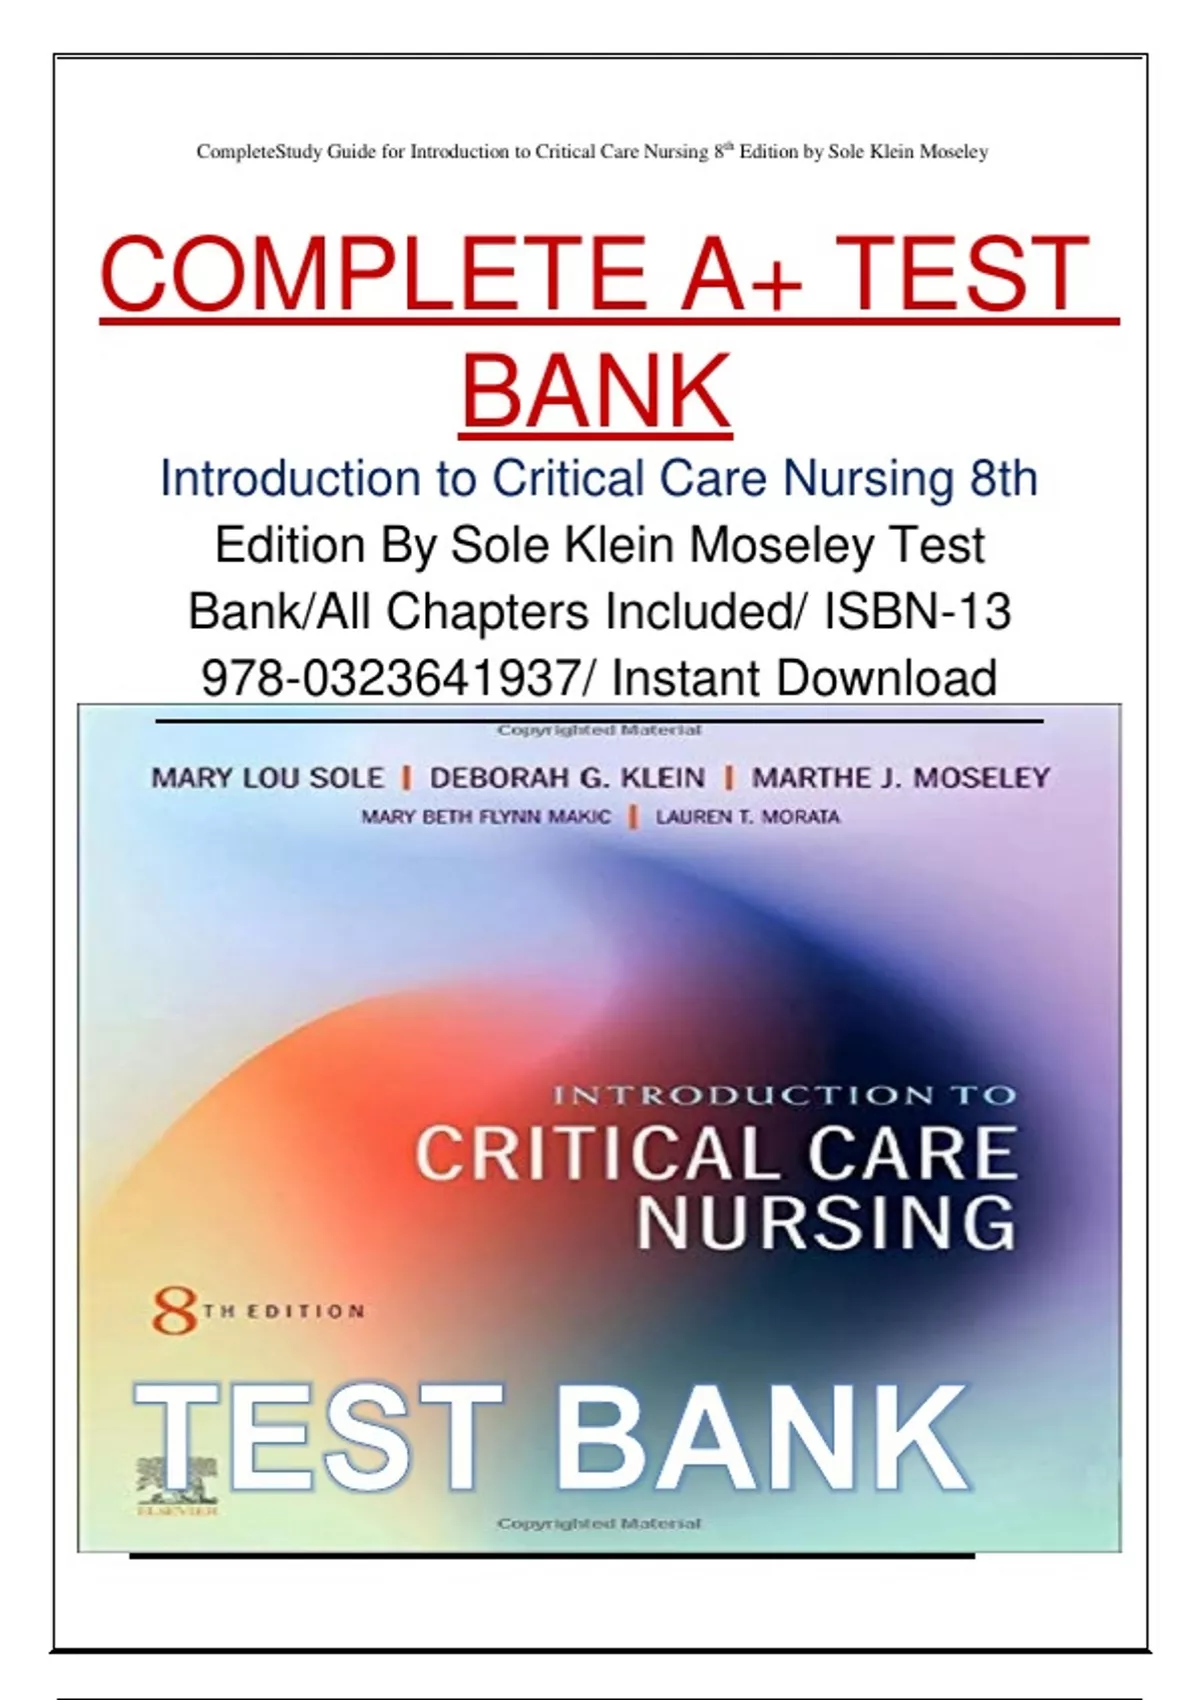 COMPLETE A+ TEST BANK Introduction to Critical Care Nursing 8th Edition By  Sole Klein Moseley Test Bank/All Chapters Included/ ISBN-/ Instant Download  - Critical care nursing - Stuvia US